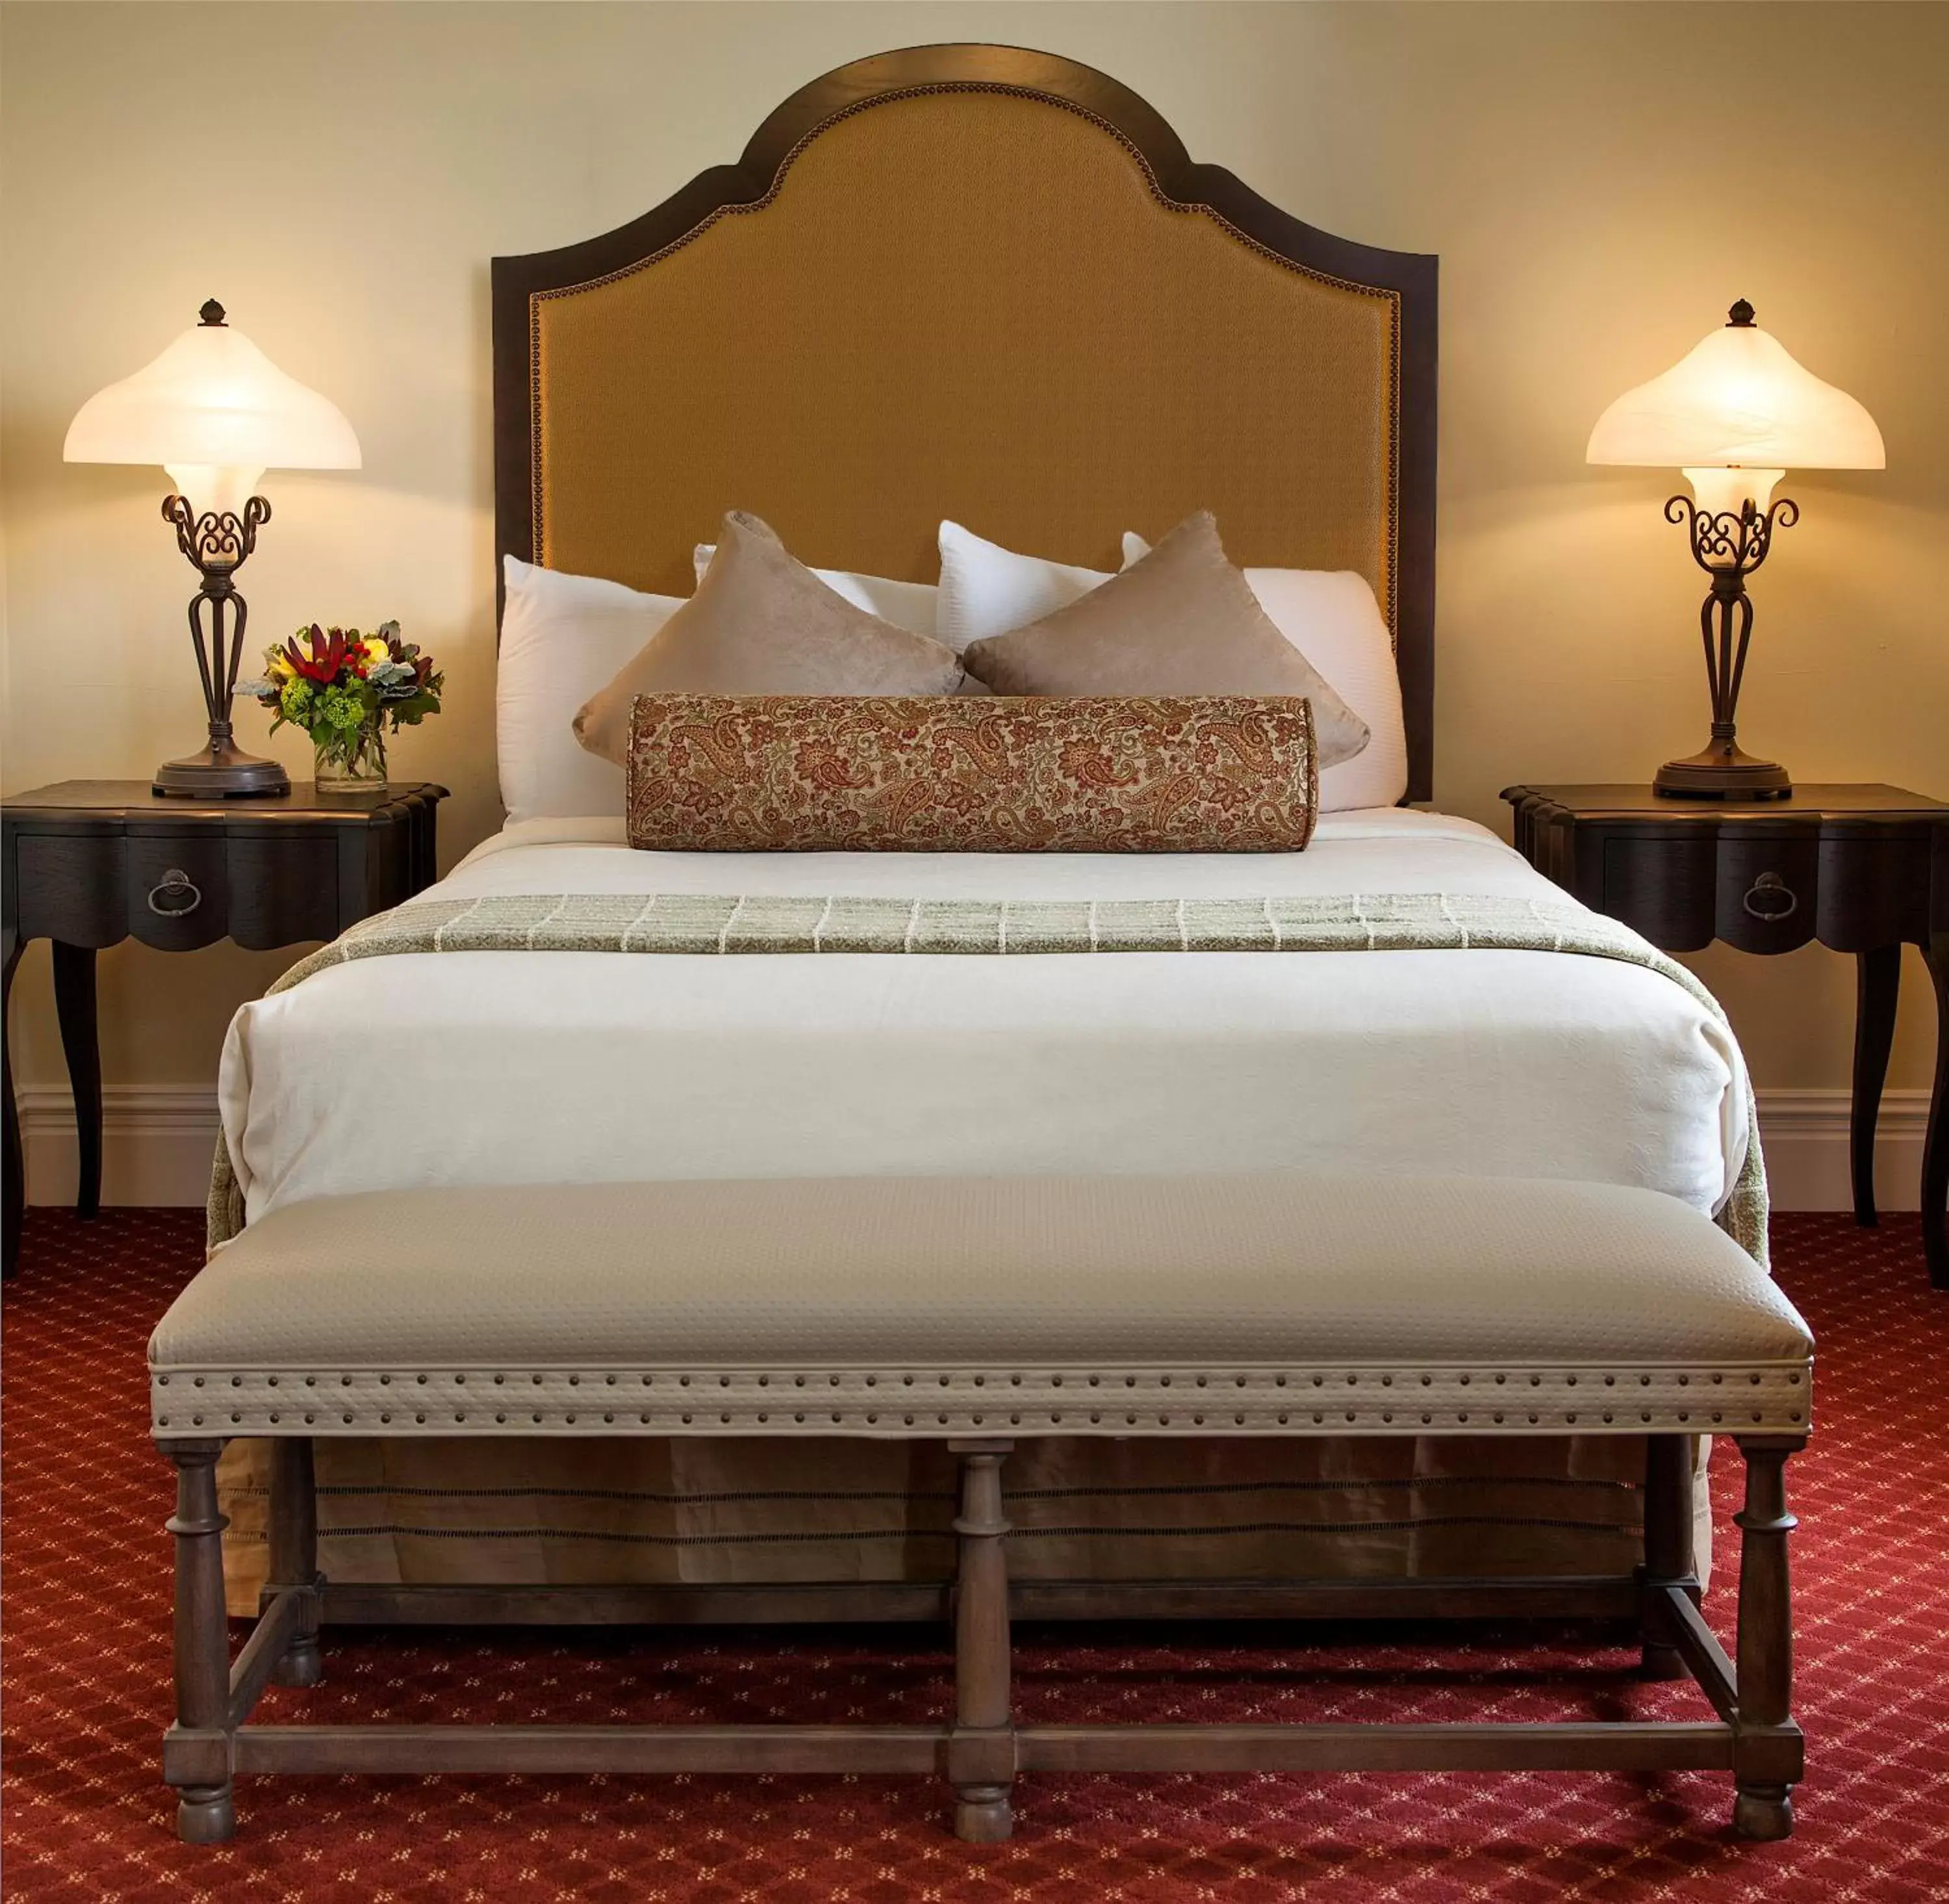 Decorative detail, Bed in Paso Robles Inn